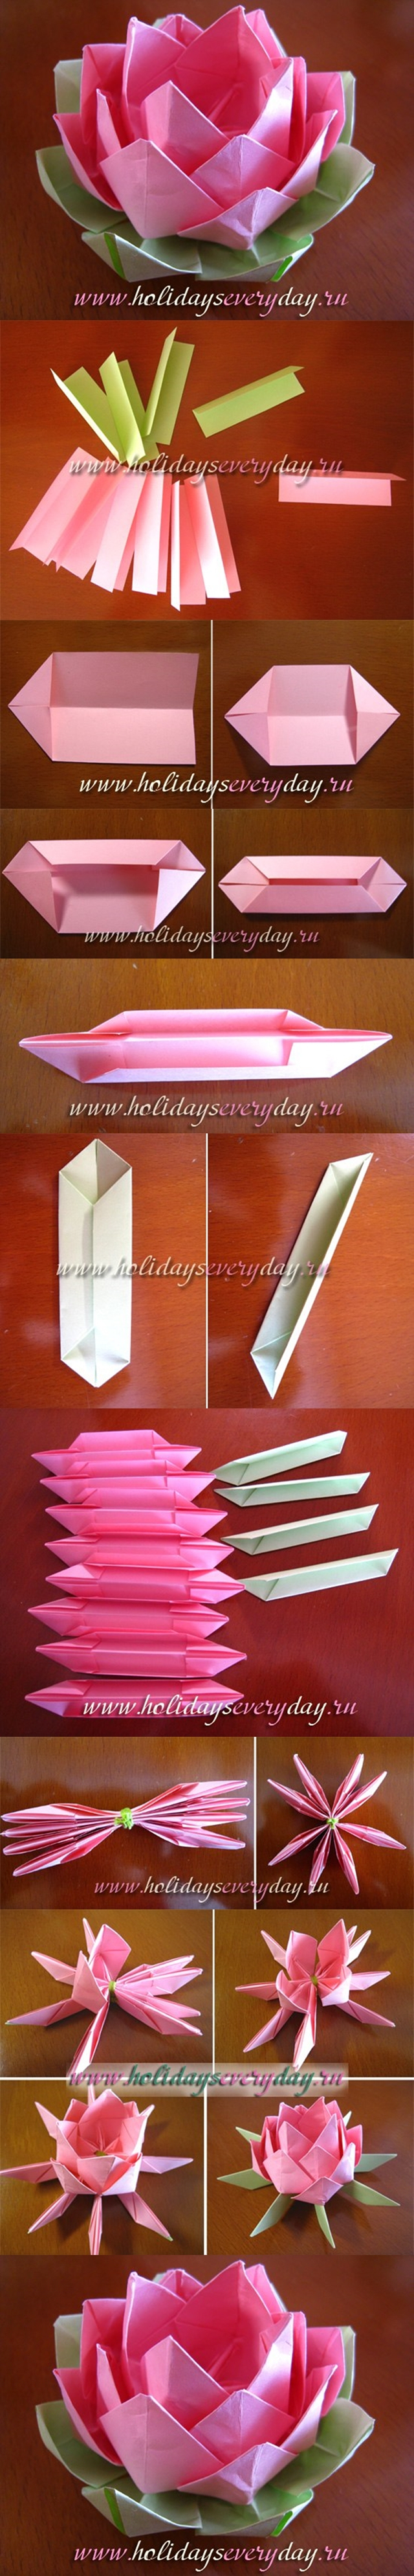 How To Make Origami Lotus Flower Video How To Make An Easy Paper Lotus Flower Flowers Healthy